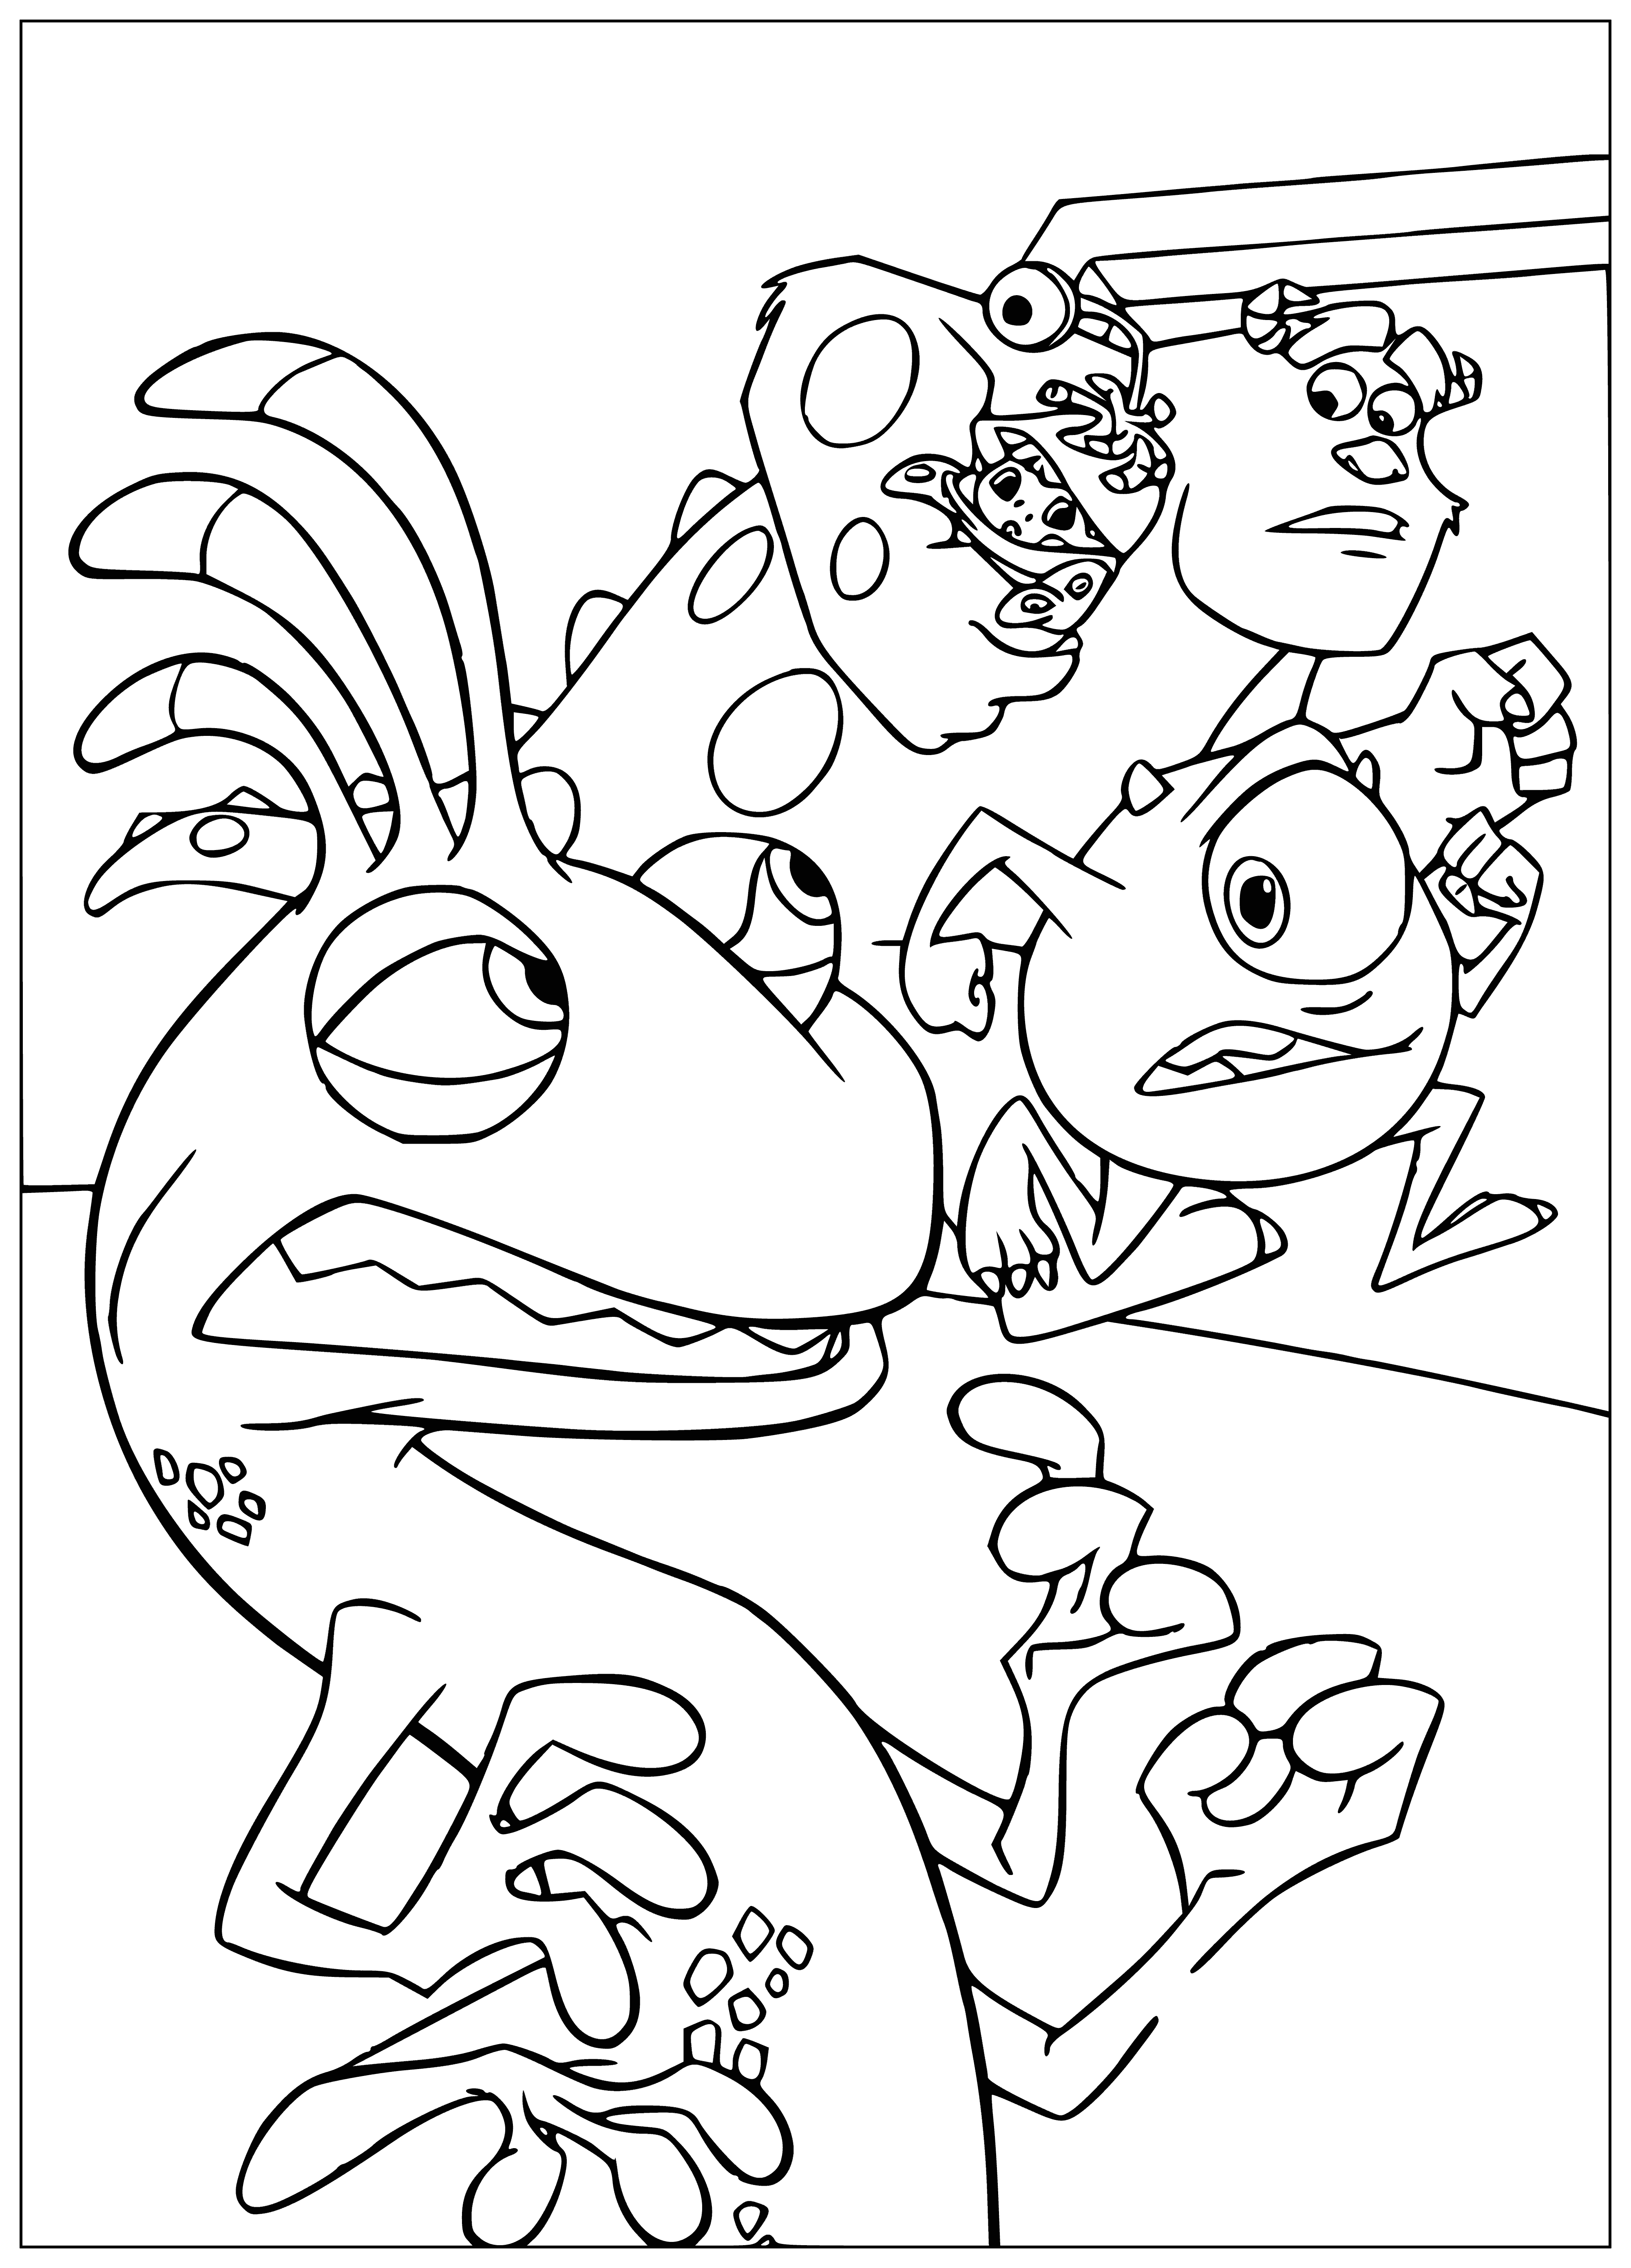 Sally and Mike run away from Randall. coloring page